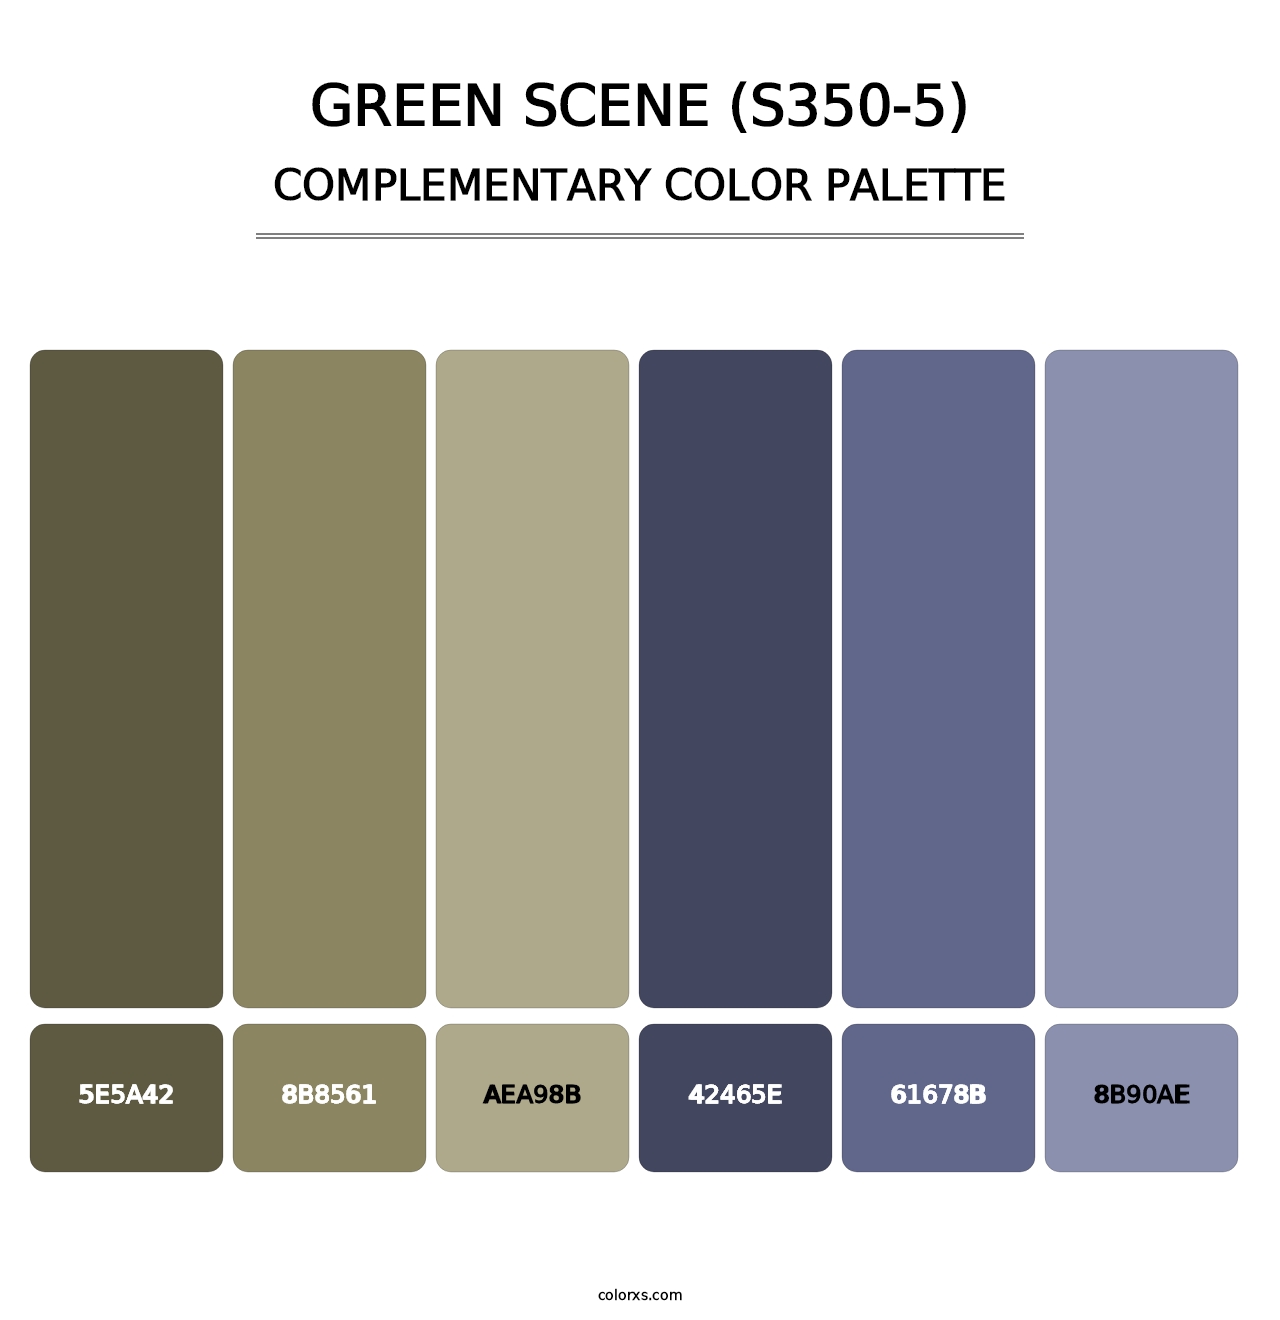 Green Scene (S350-5) - Complementary Color Palette